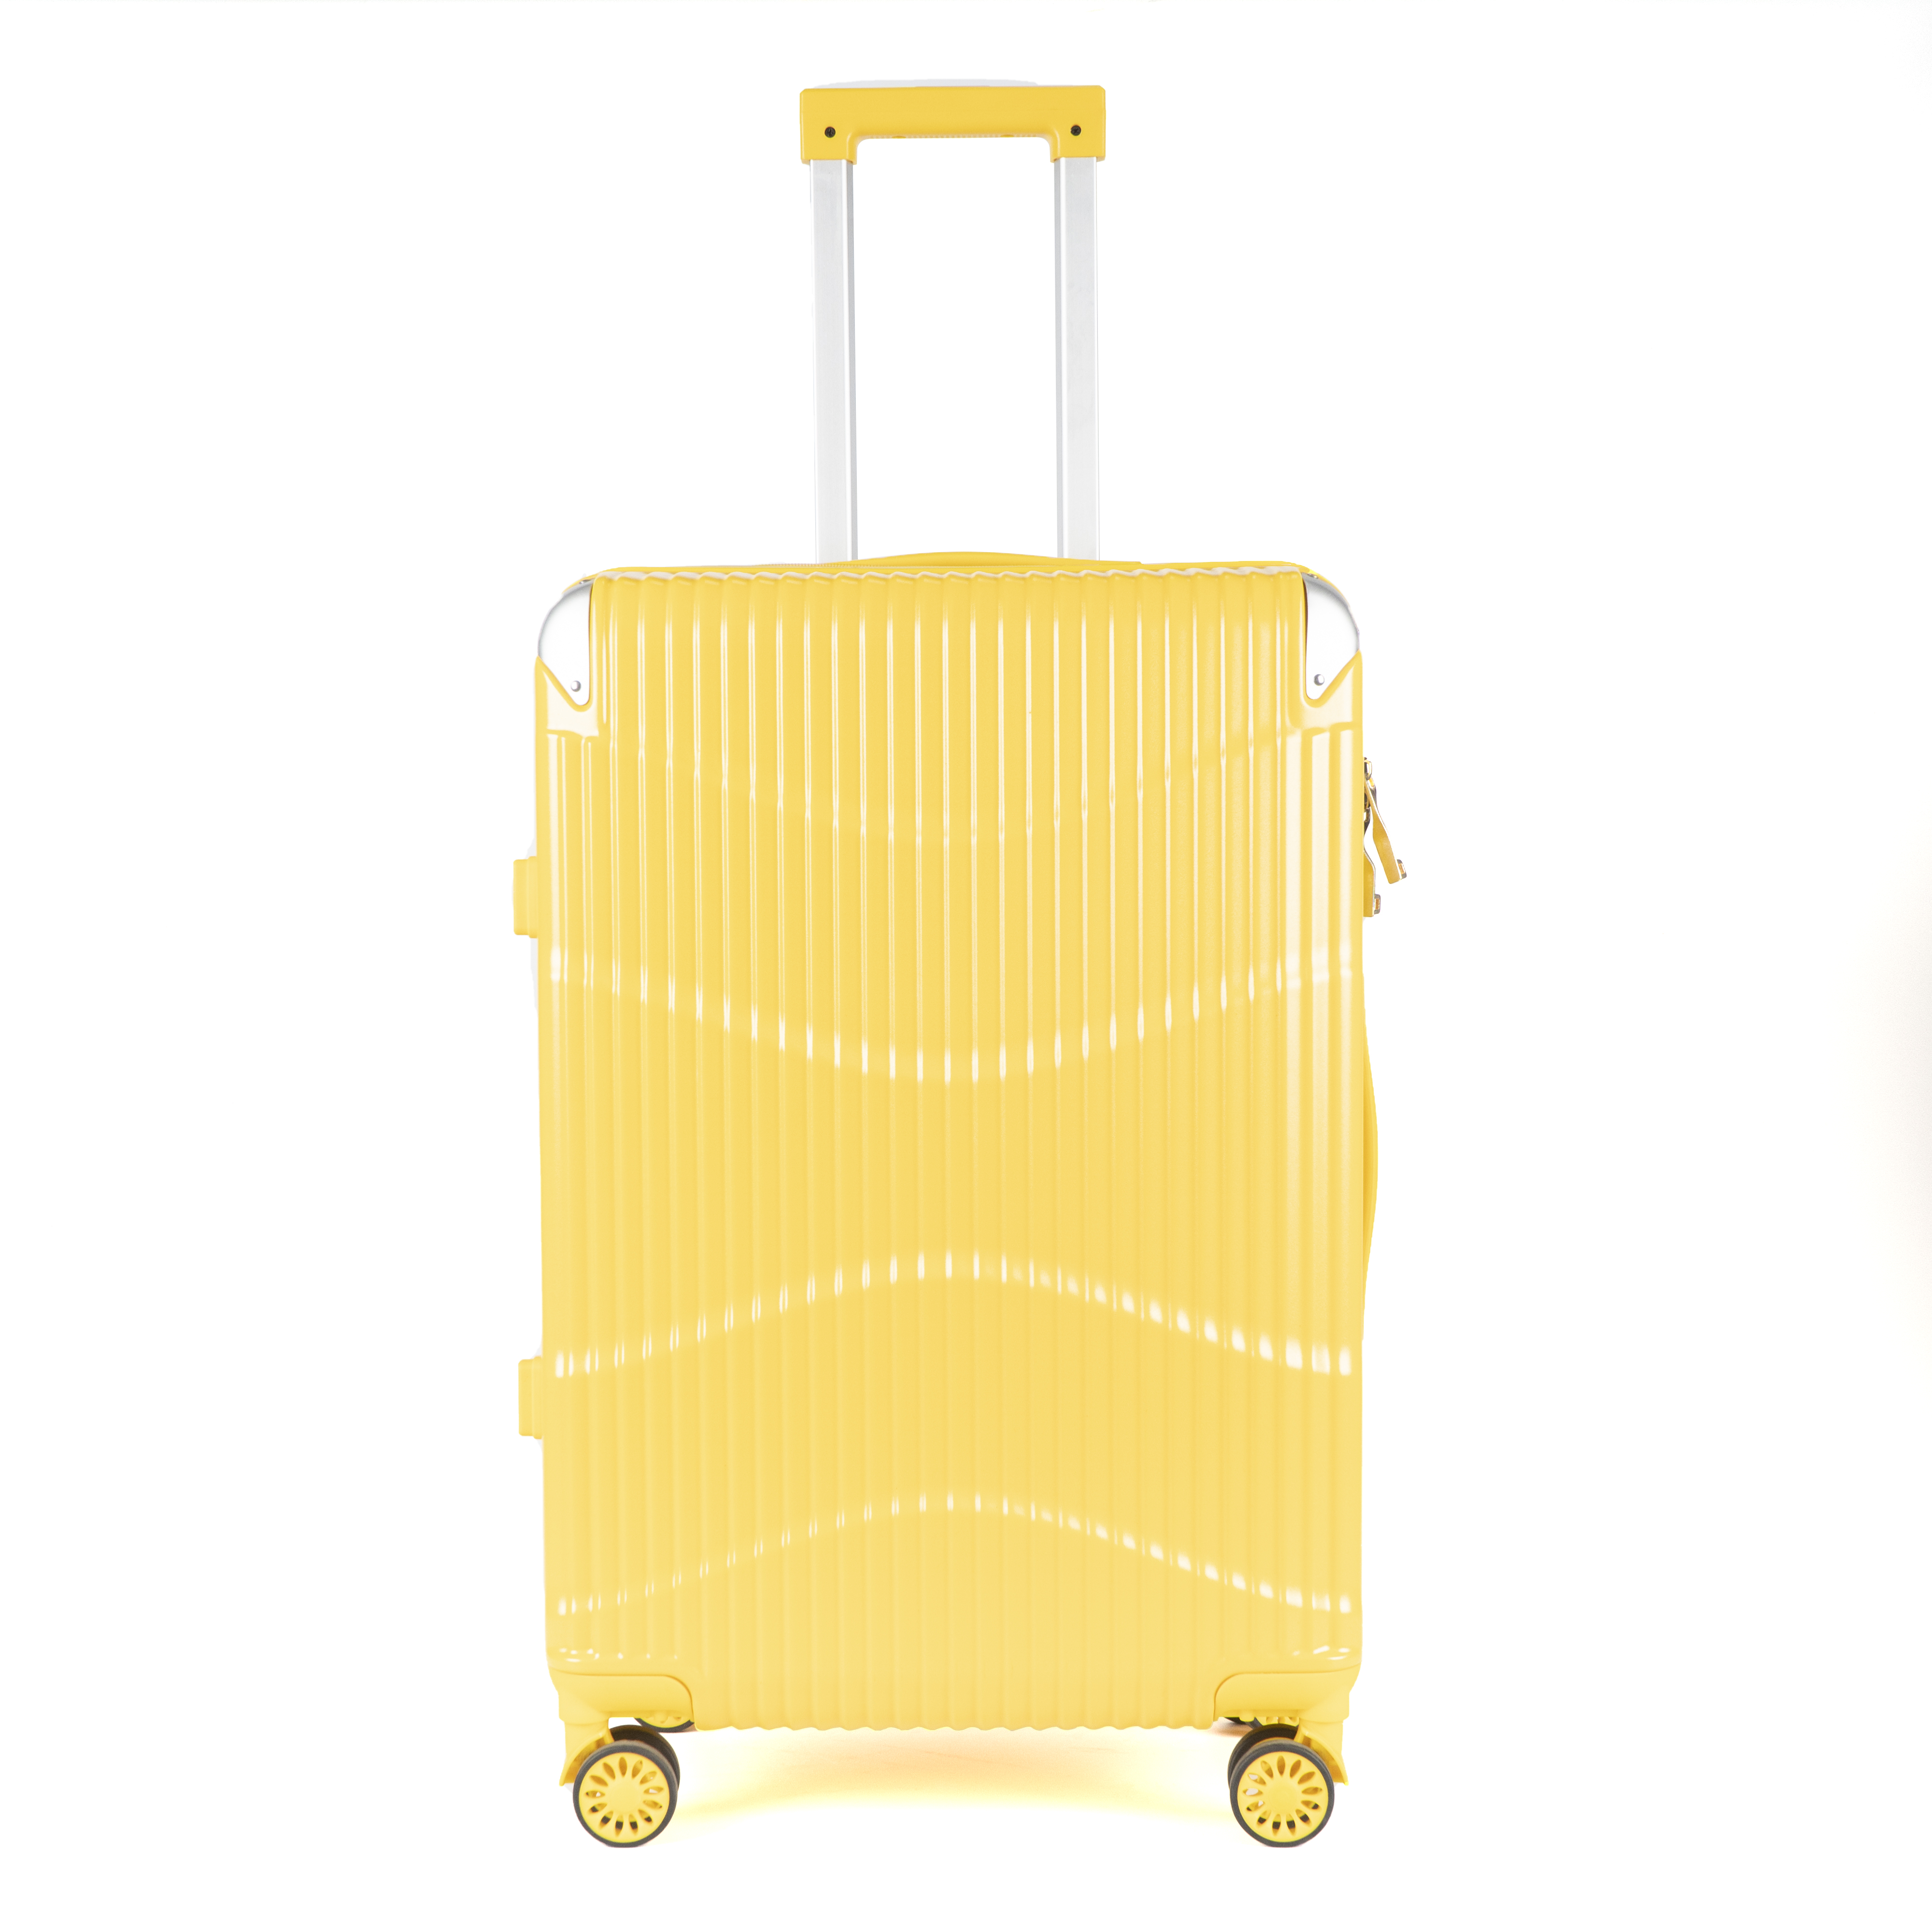 https://www.dwluggage.com/corner-guard-protection-trolley-luggage-suitcase-sets-with-tsa-approved-lock-product/